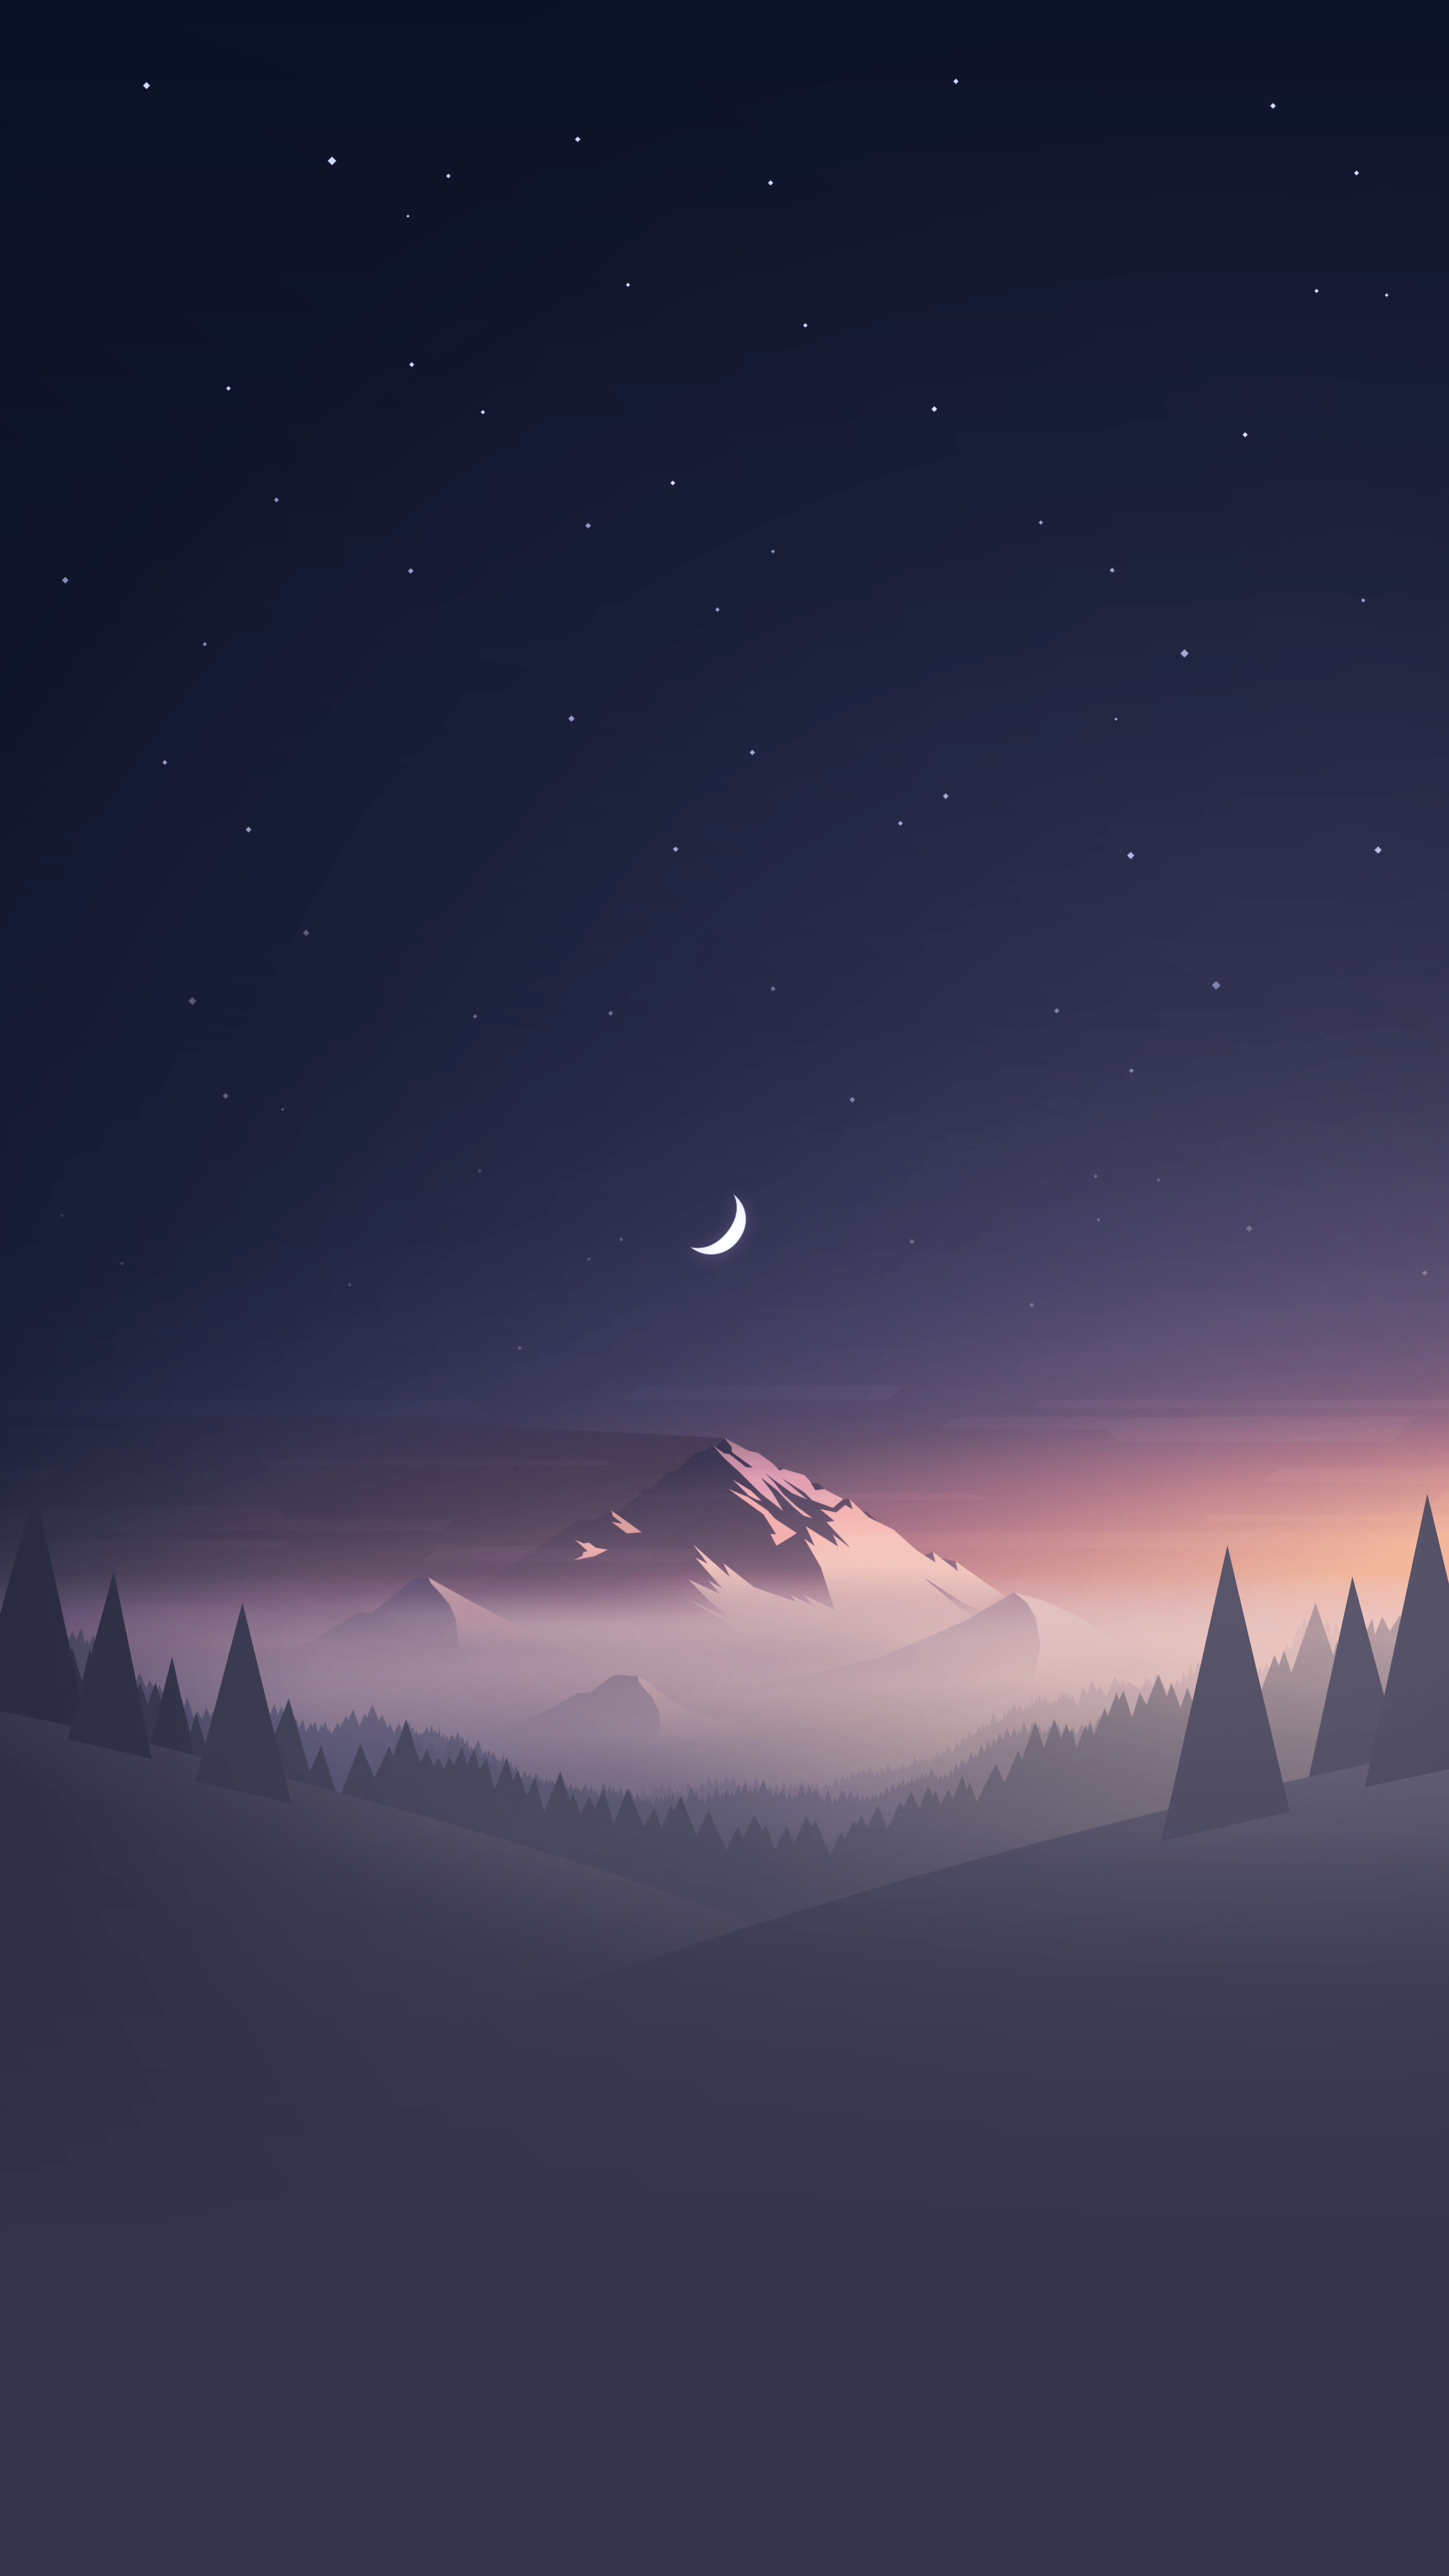 Night Call Wallpaper,HD Artist Wallpapers,4k Wallpapers,Images